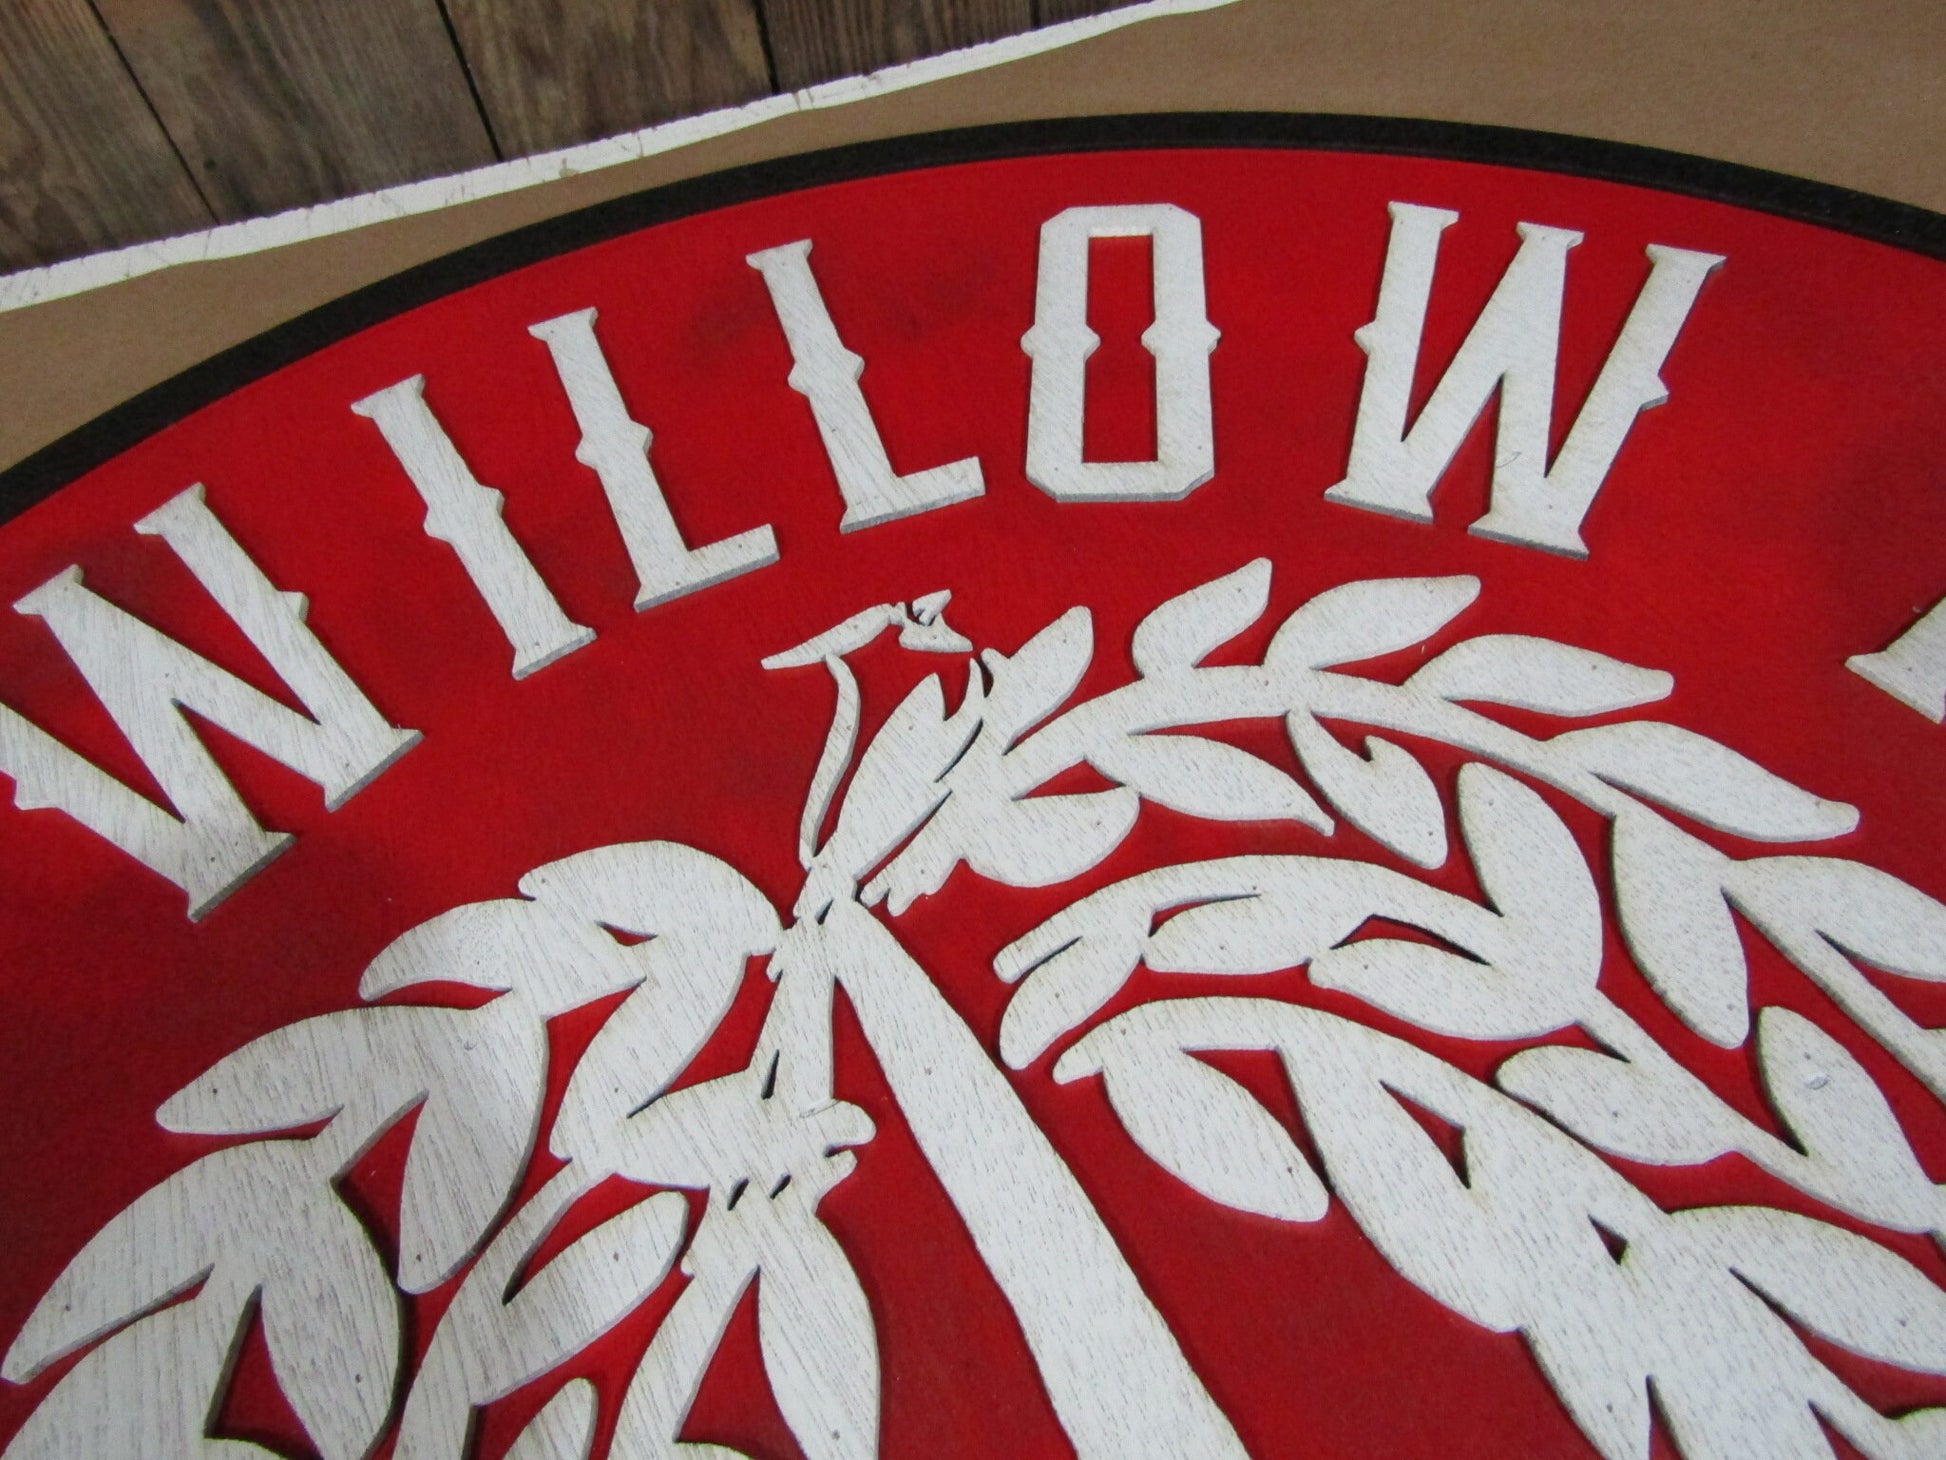 Large Round Custom Sign Commerical Signage Tree Farm Willow Tree Redbird Red Personalized Logo Emblem Made To Order 3D Raised Text Handmade